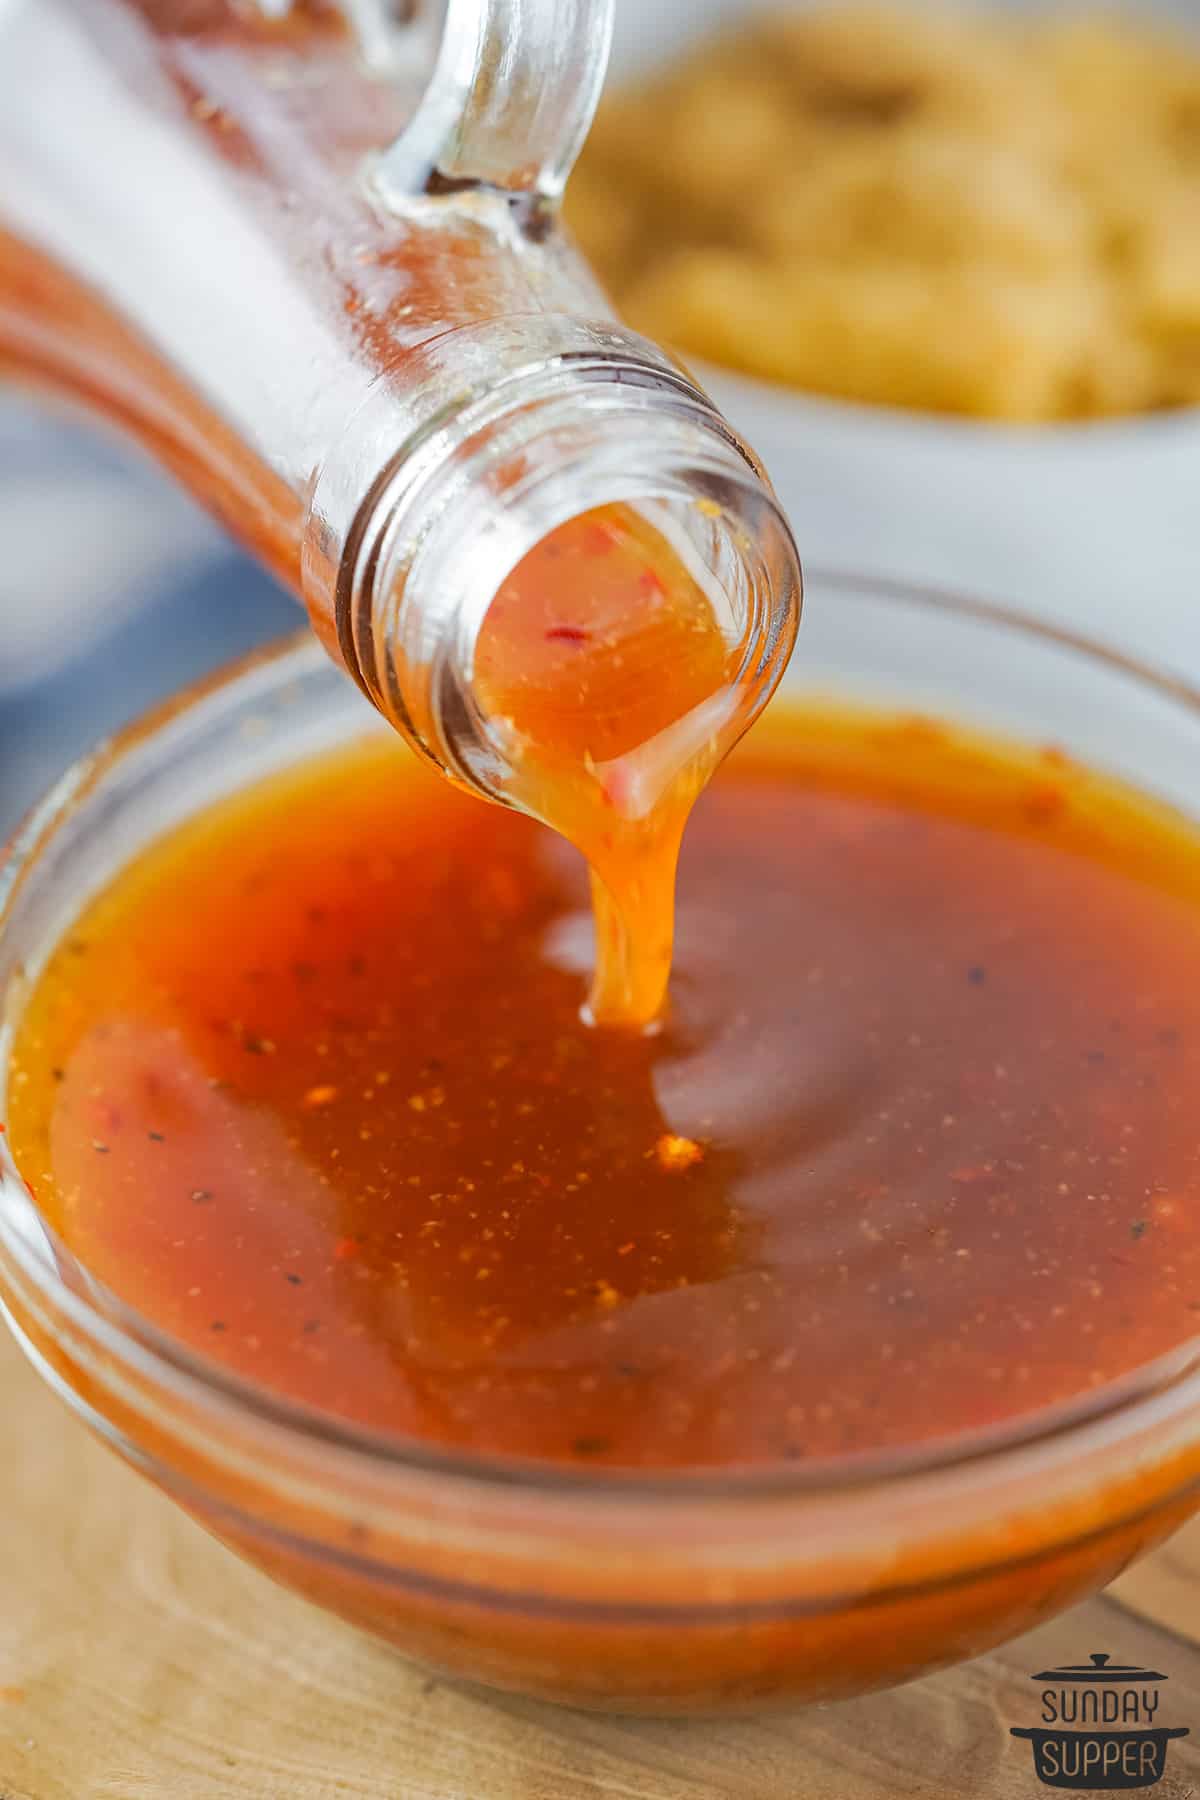 completed hot sauce being poured from a glass jar into a bowl